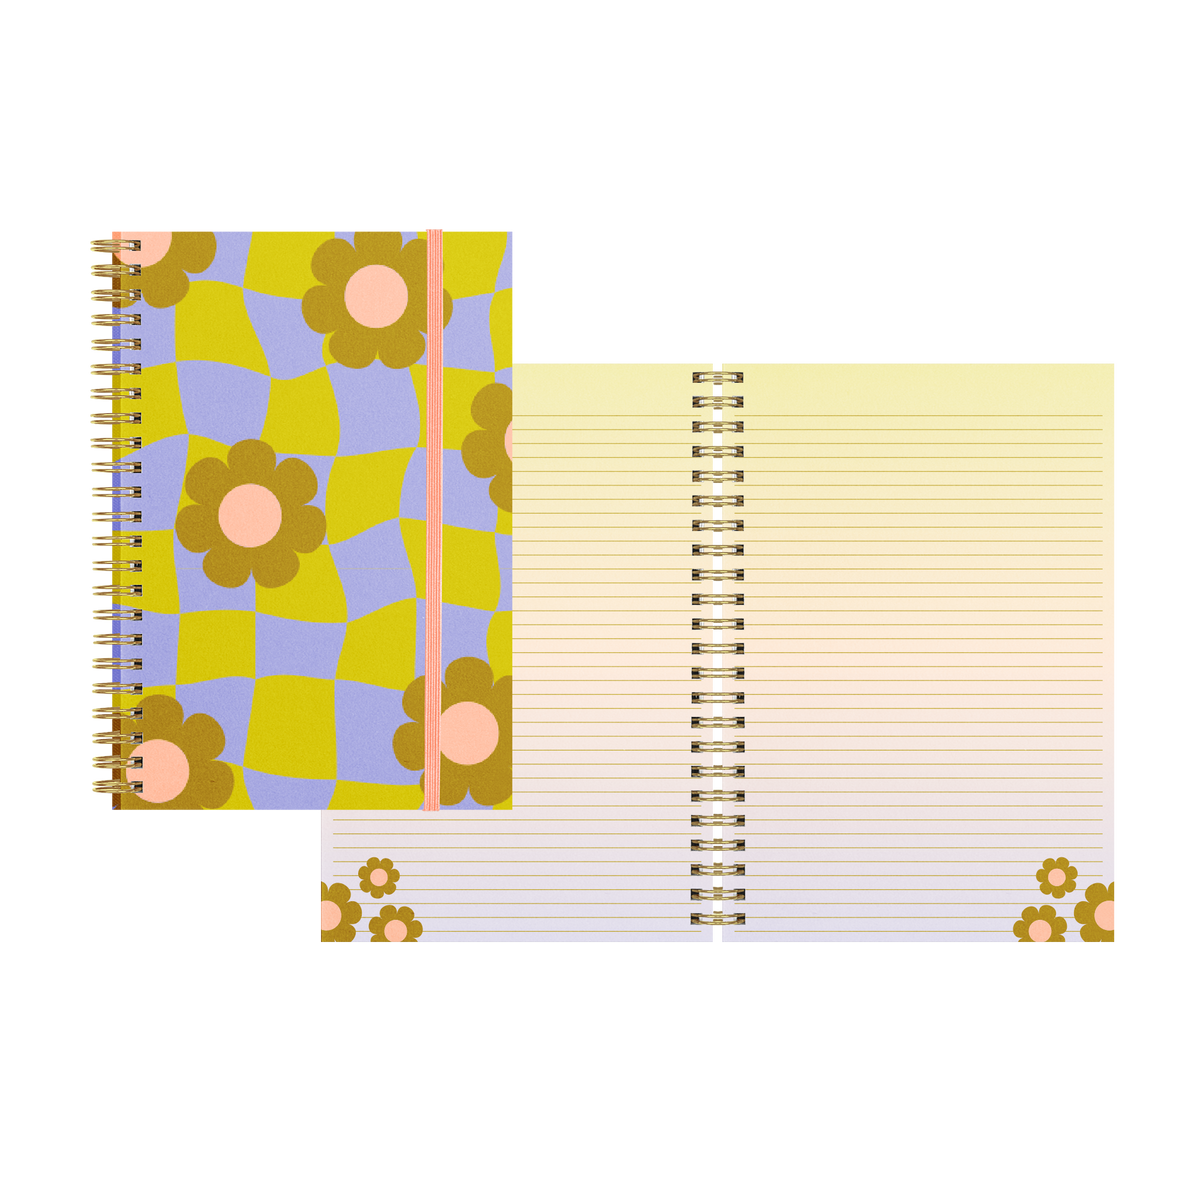 Cool Funky Daisy Notebook - 580 Threads